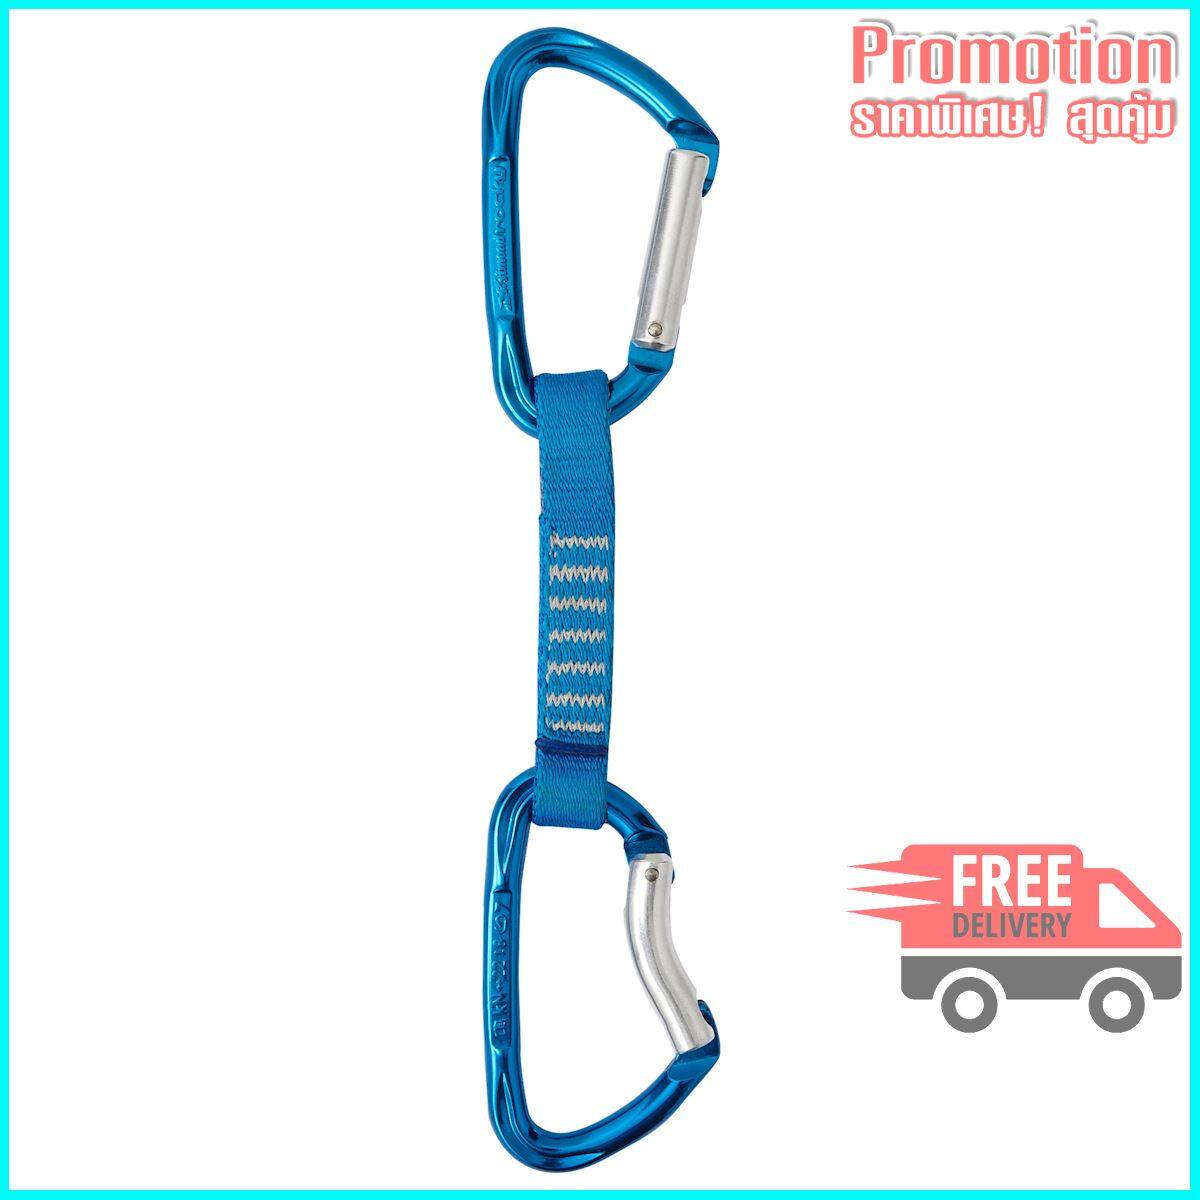 CLIMBING AND MOUNTAINEERING QUICKDRAW 11 CM - BLUE